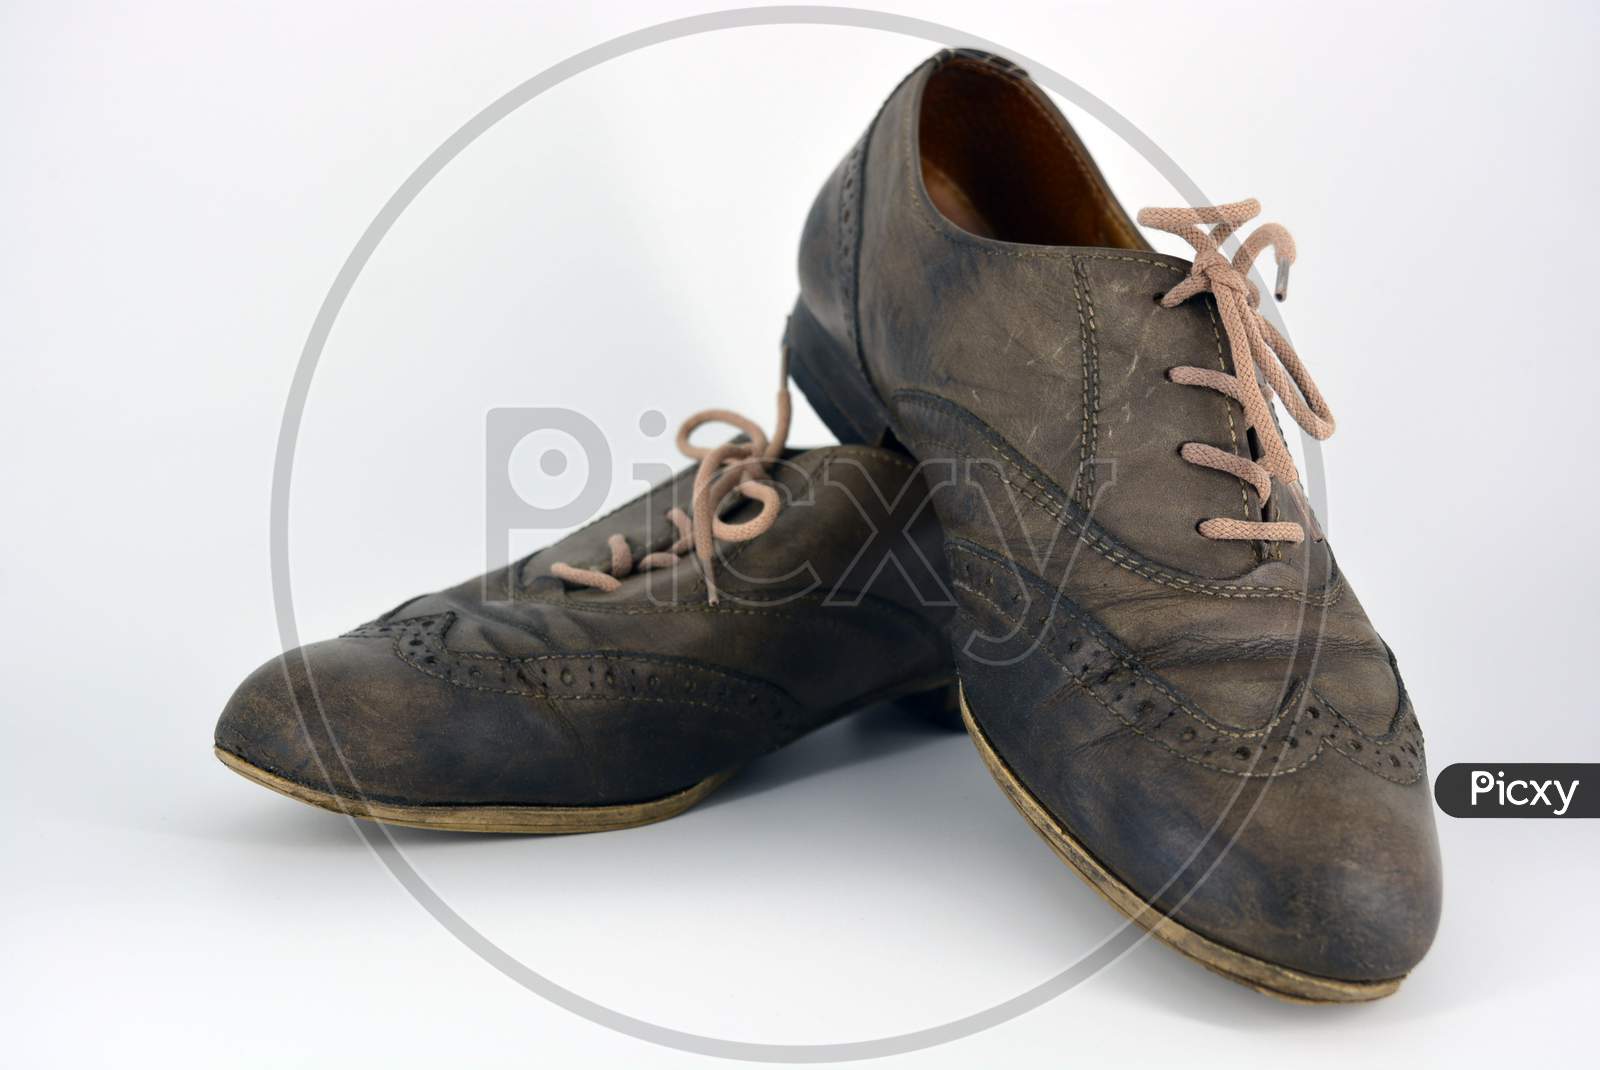 Female leather shoes located on a white background. Oxford shoes with gray shoelaces on a flat heel. Gray women's shoes in a fastening, unwitting.